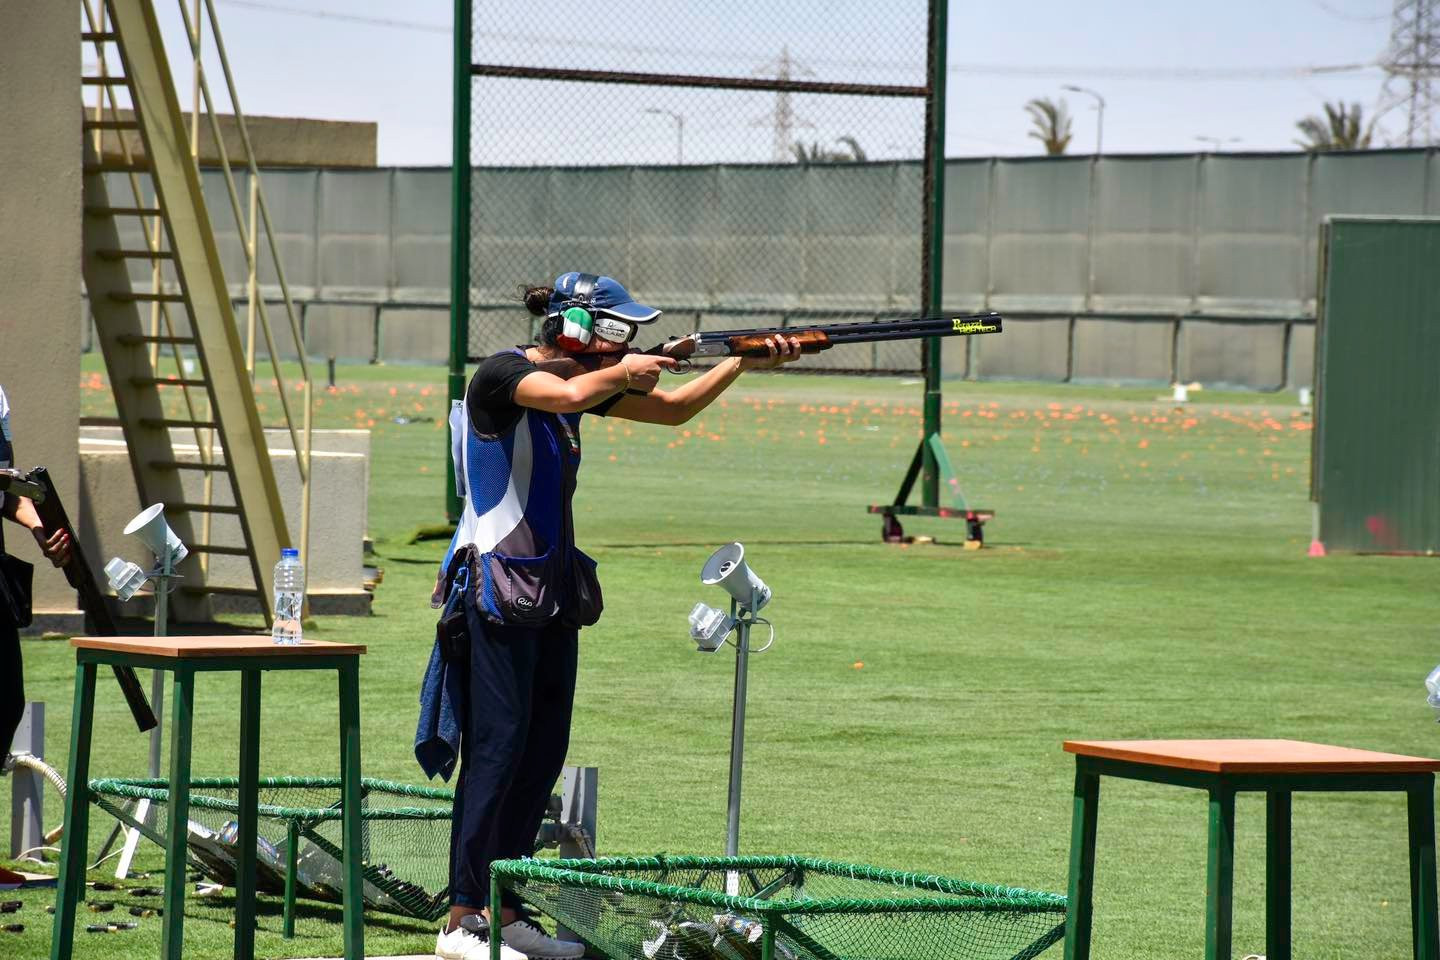 Italy topped the ISSF Shotgun World Cup medals table in Cairo ©ISSF